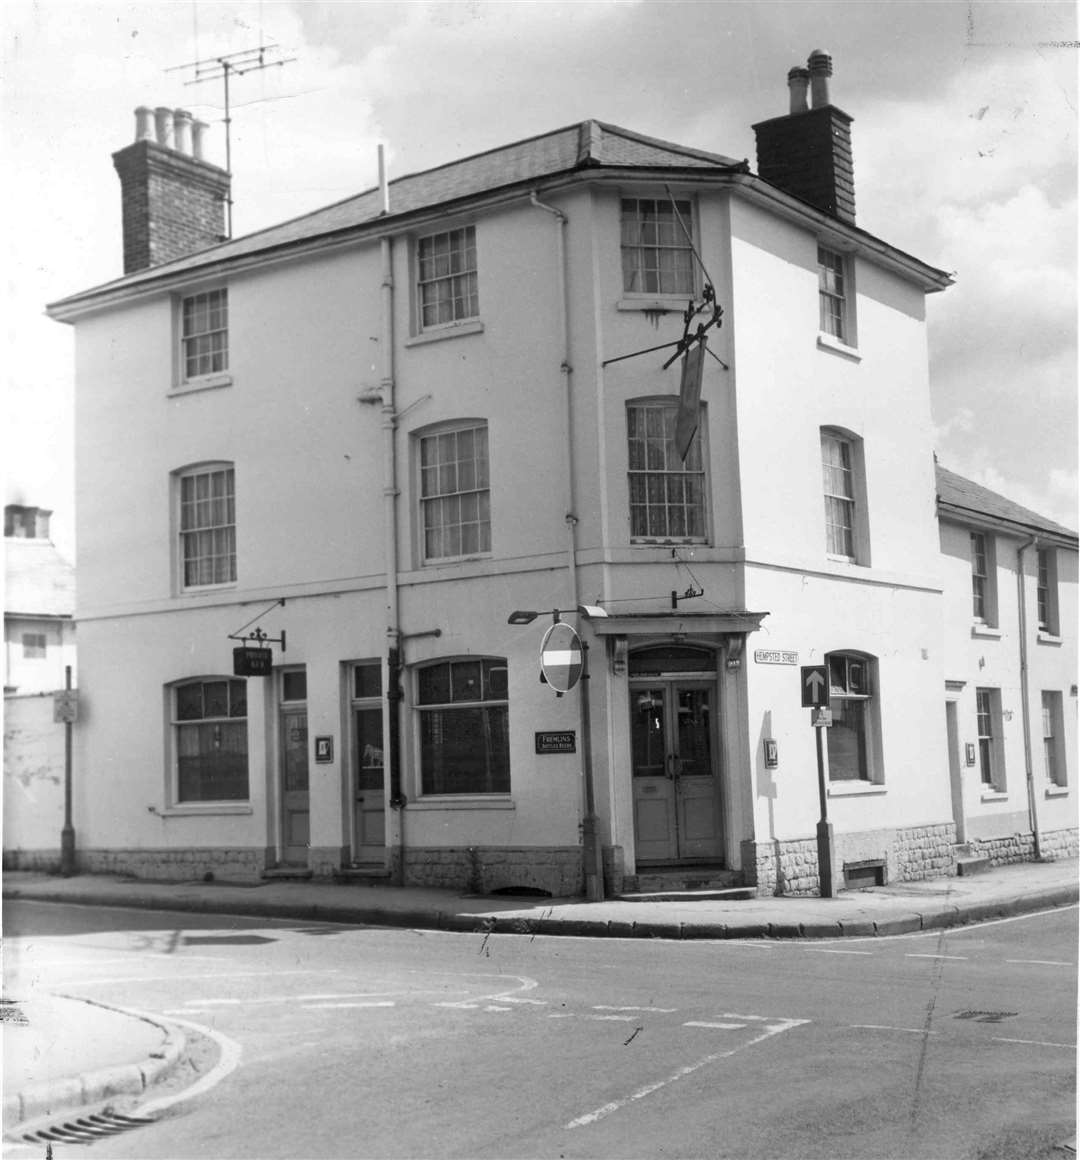 Taken in June 1972, one of the final pictures of the Wellington public house which stood on the corner of Hempsted Street. Picture: Images of Ashford by Mike Bennett